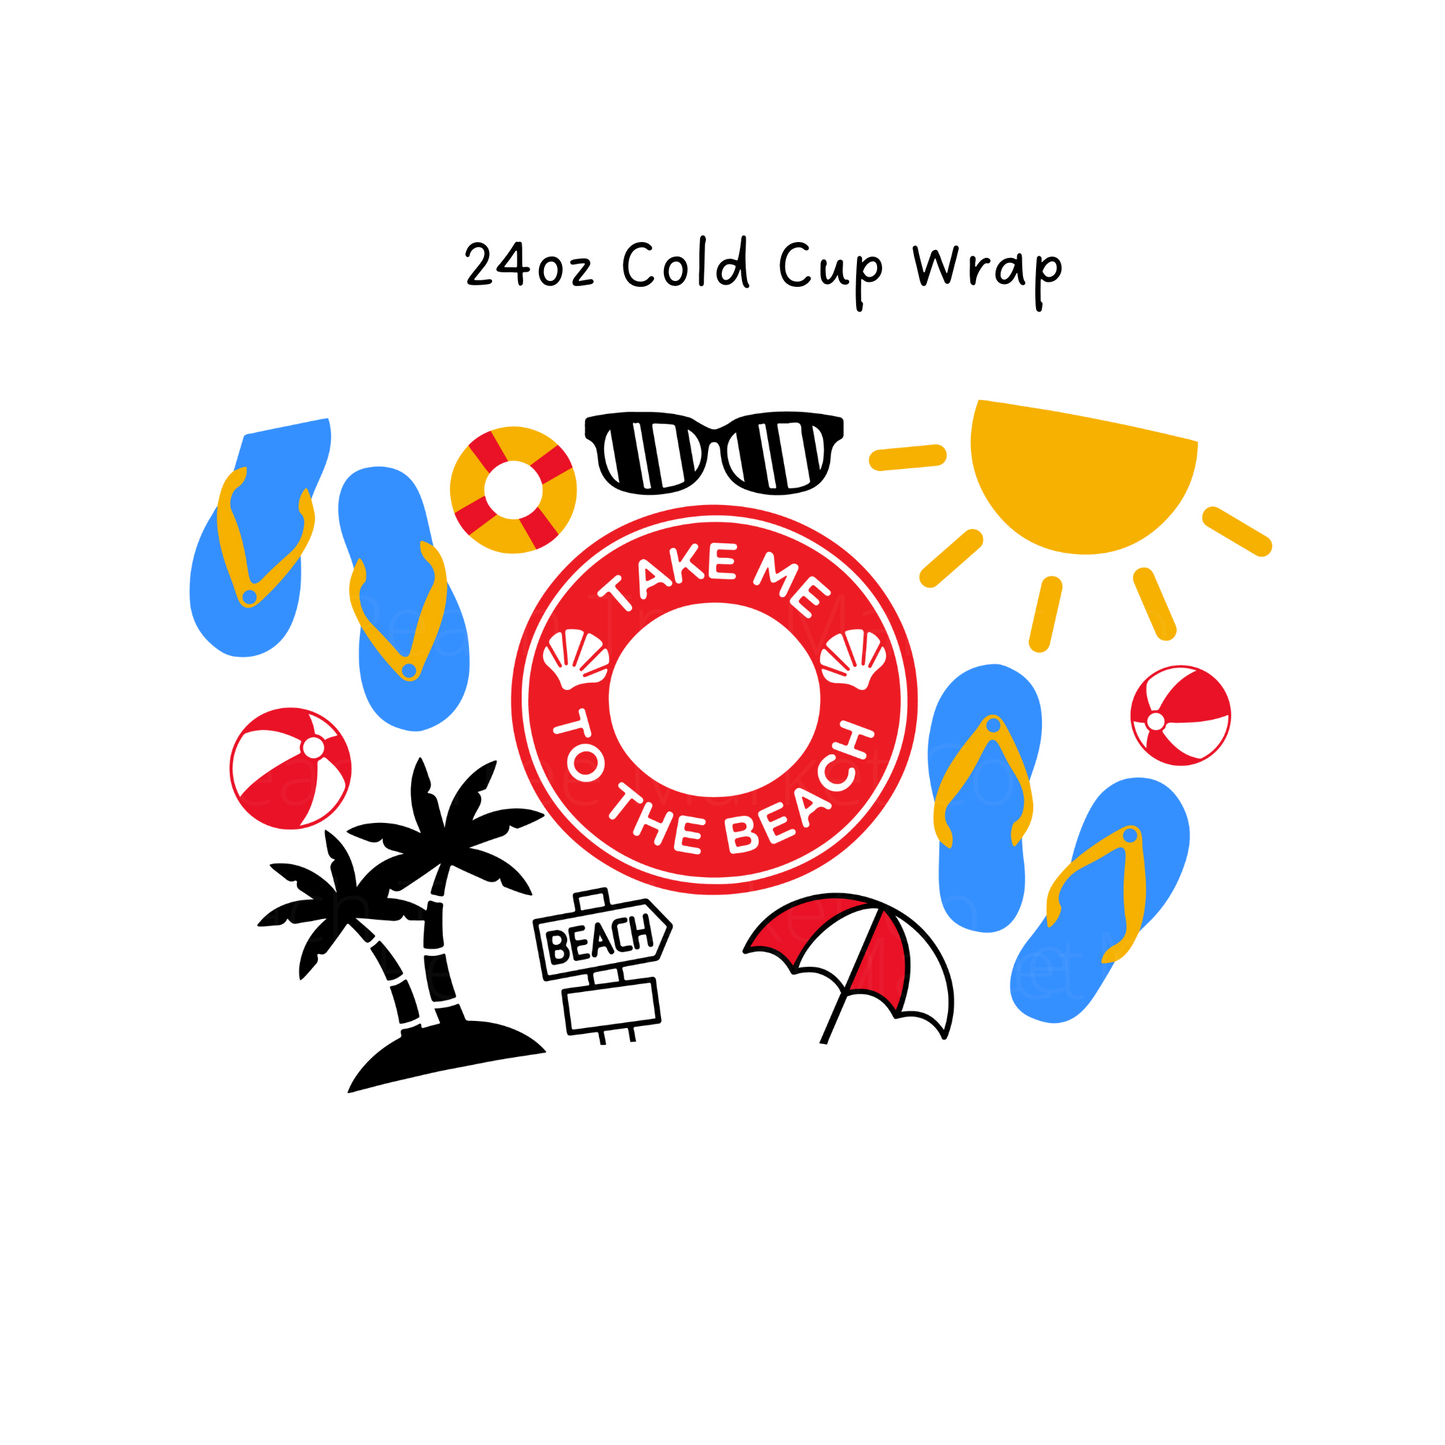 Take Me To The Beach 24 OZ Cold Cup Wrap